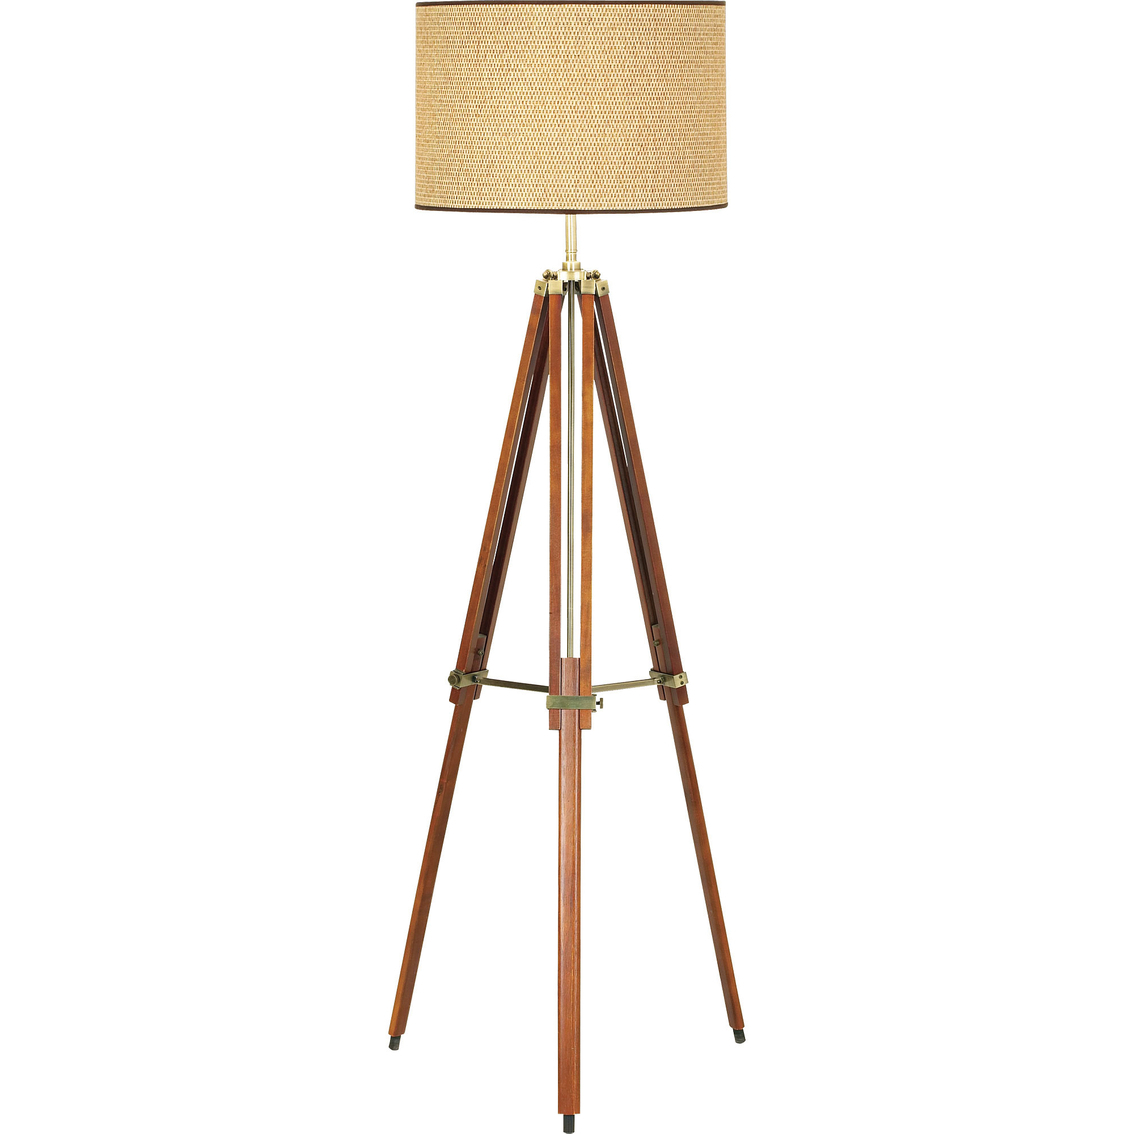 Pacific Coast Lighting Tripod Floor Lamp Lamps Home within dimensions 1134 X 1134